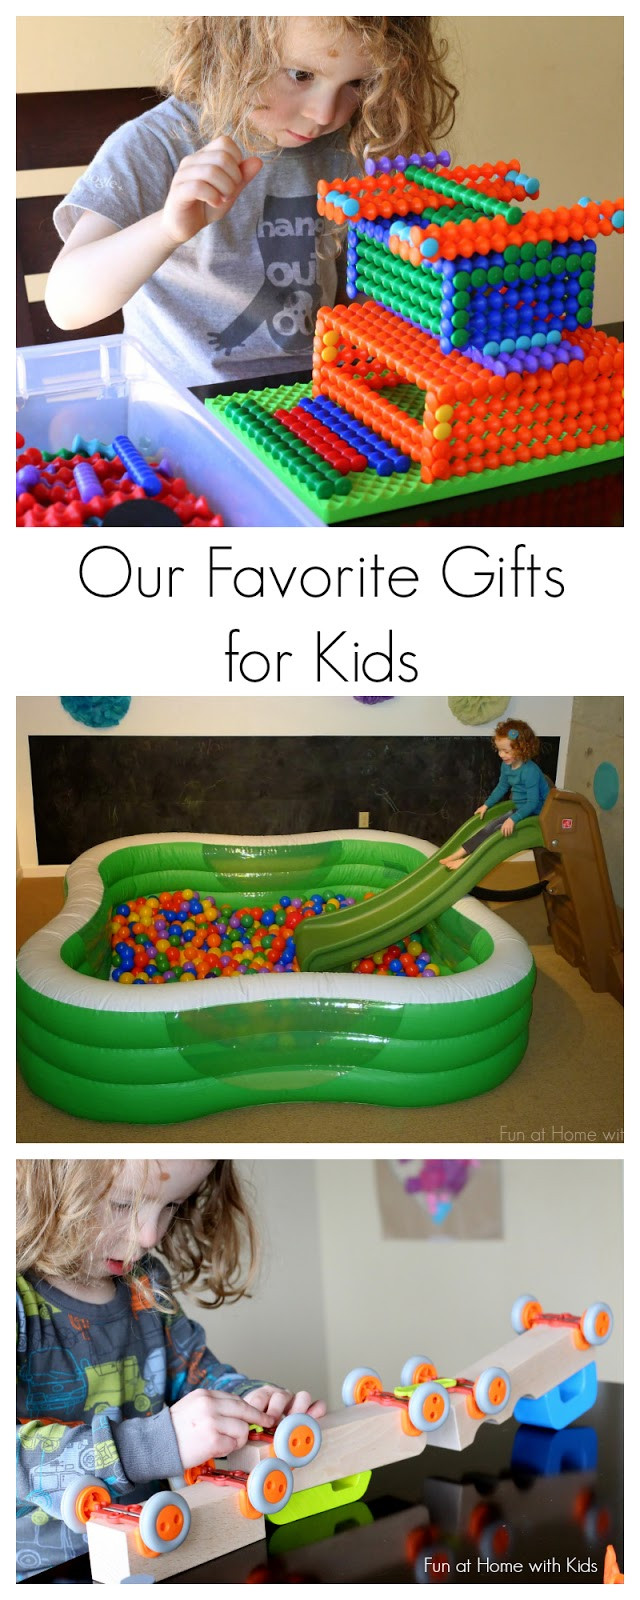 Unique Kids Christmas Gifts
 Our 10 Best and Favorite Gift Ideas for Kids